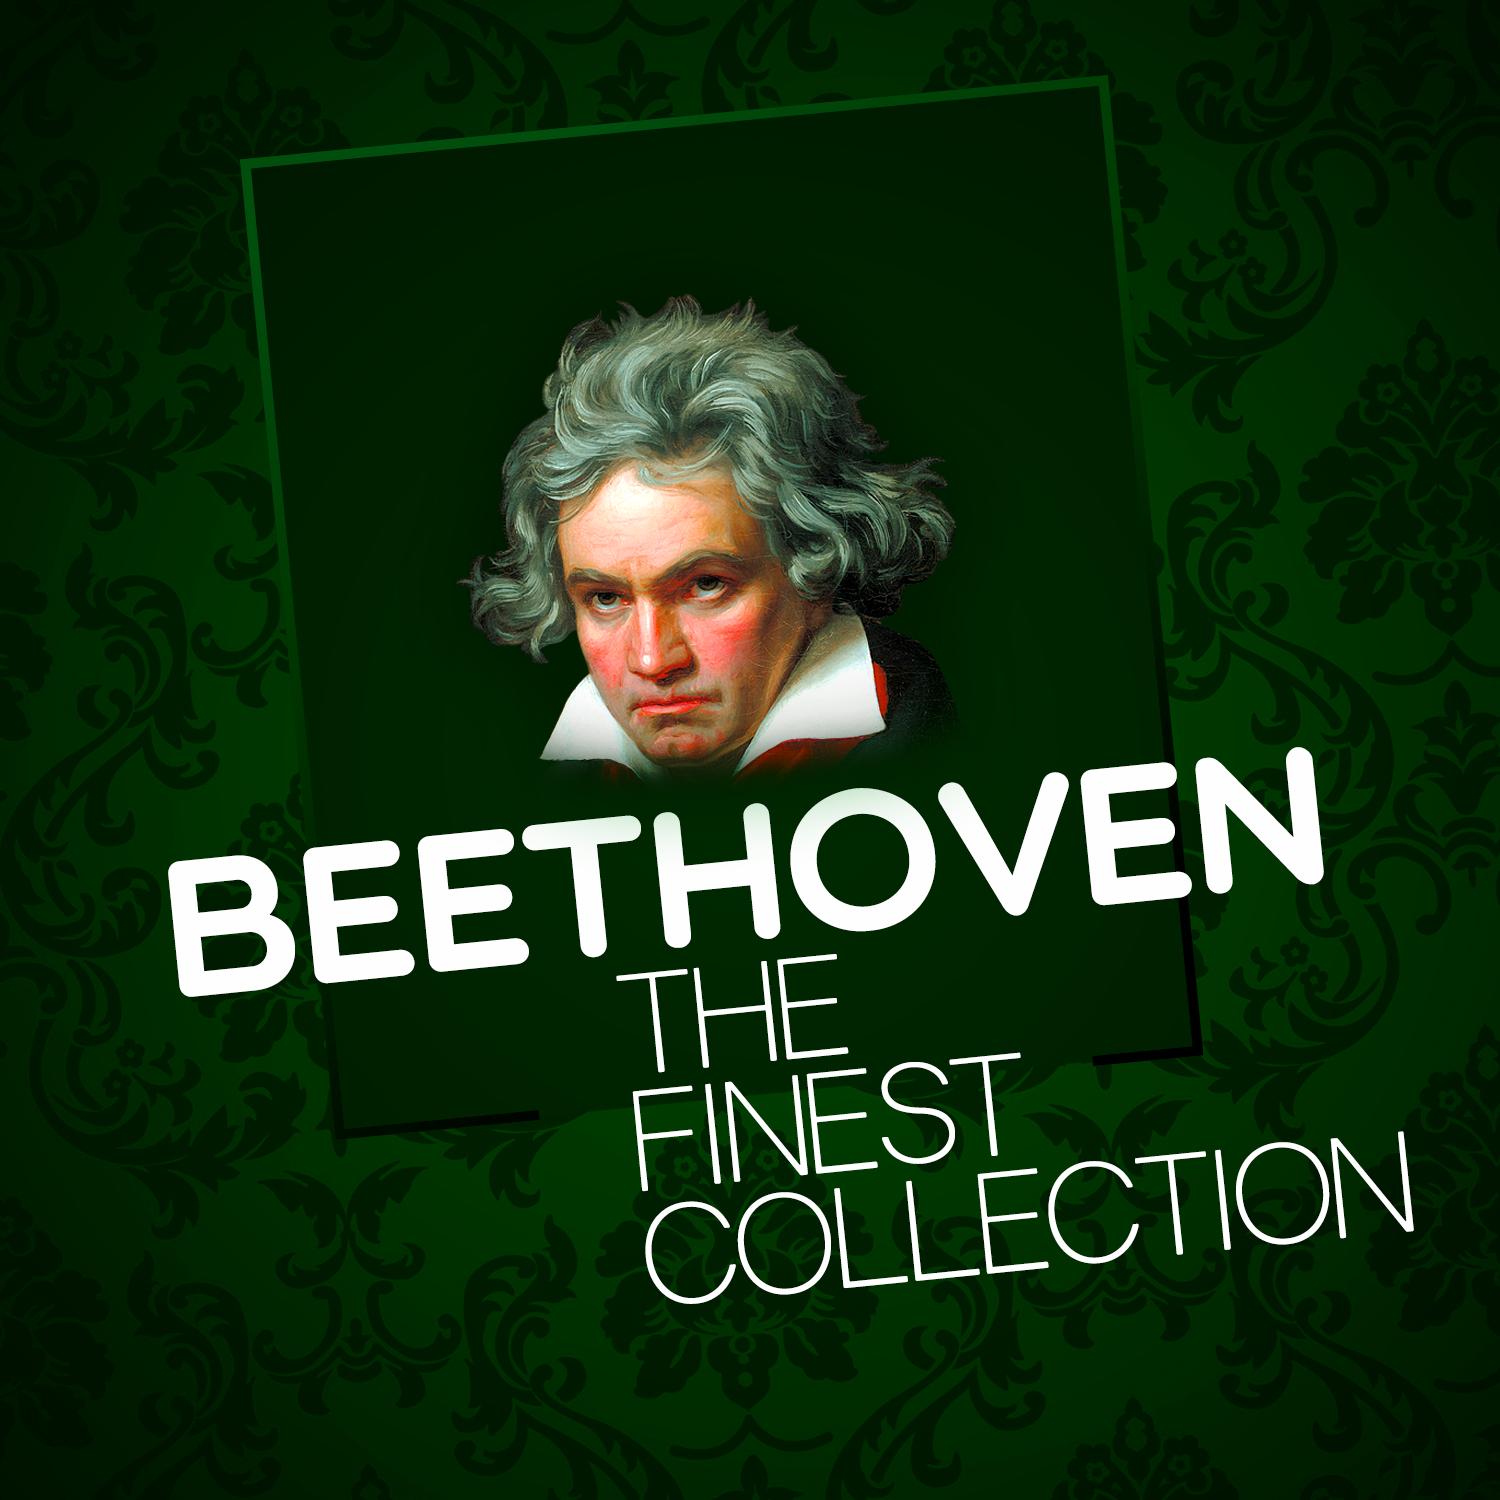 Beethoven - The Finest Collection